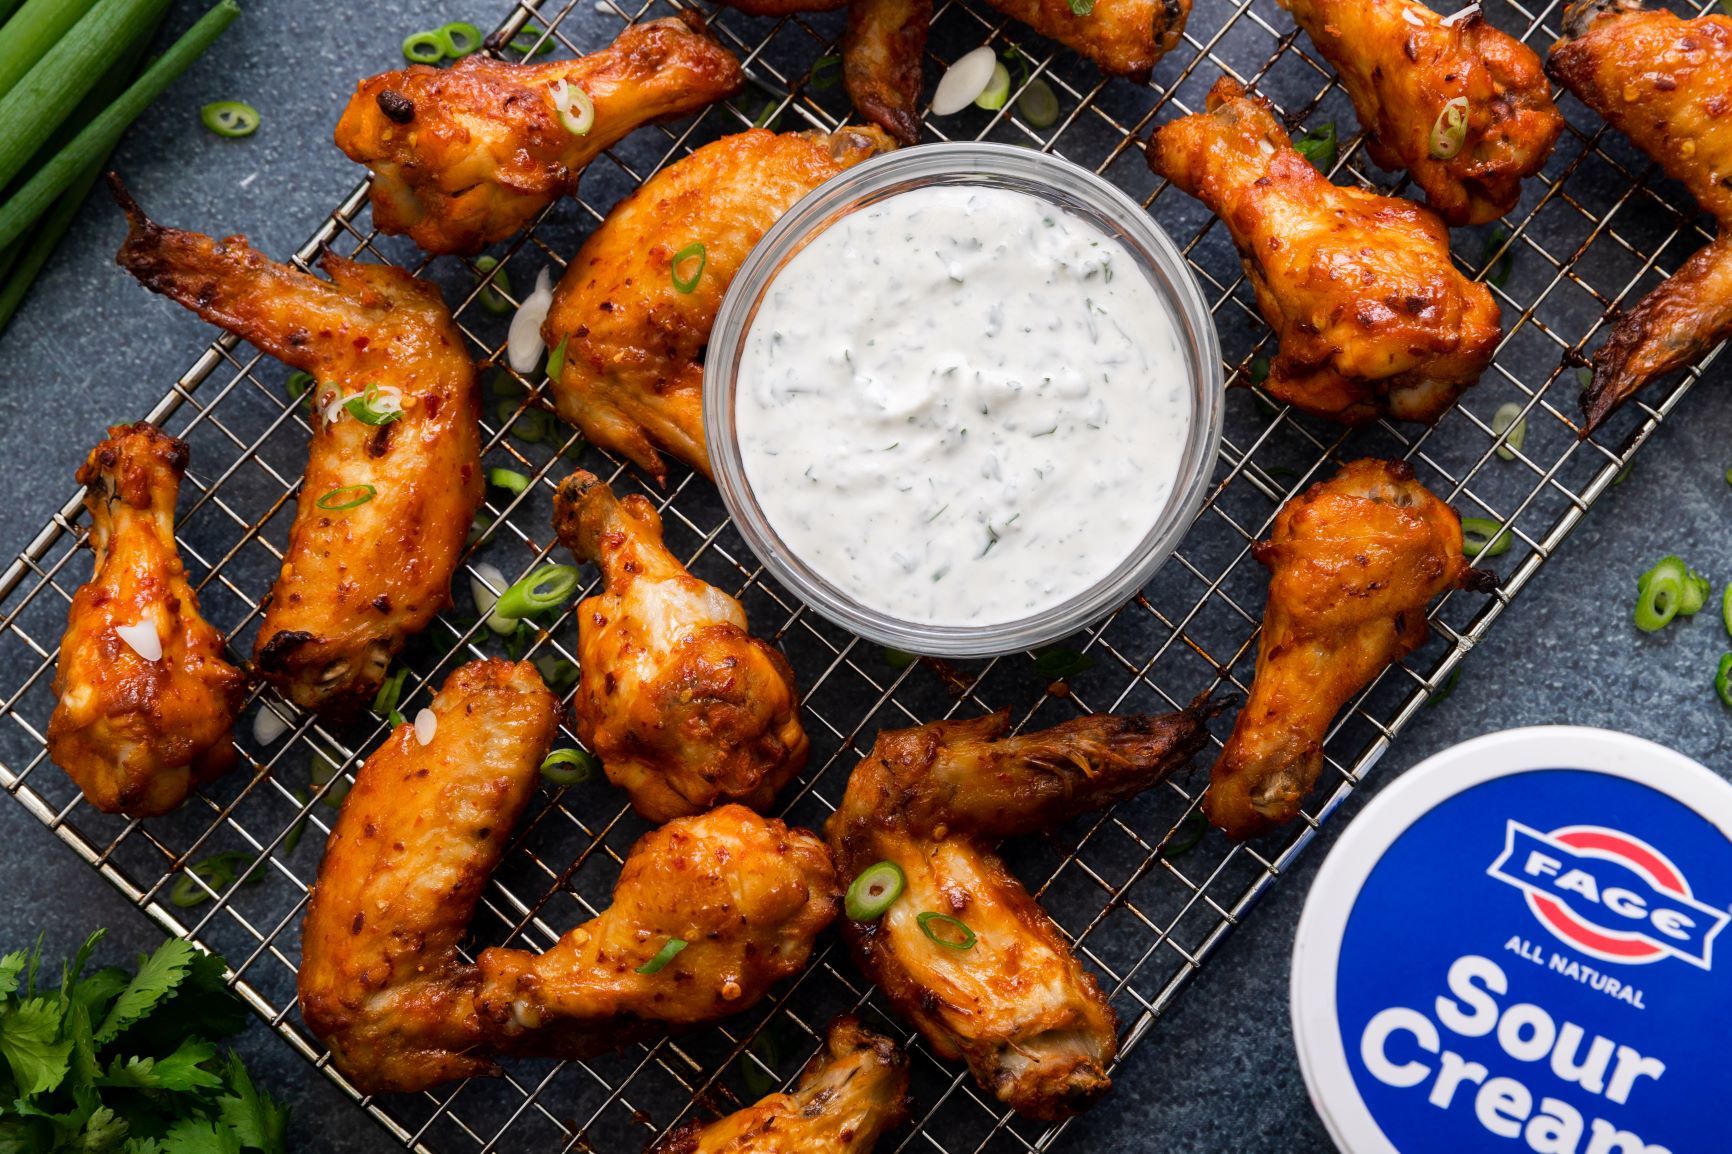 Sweet & Spicy Chicken Wings with FAGE Sour Cream